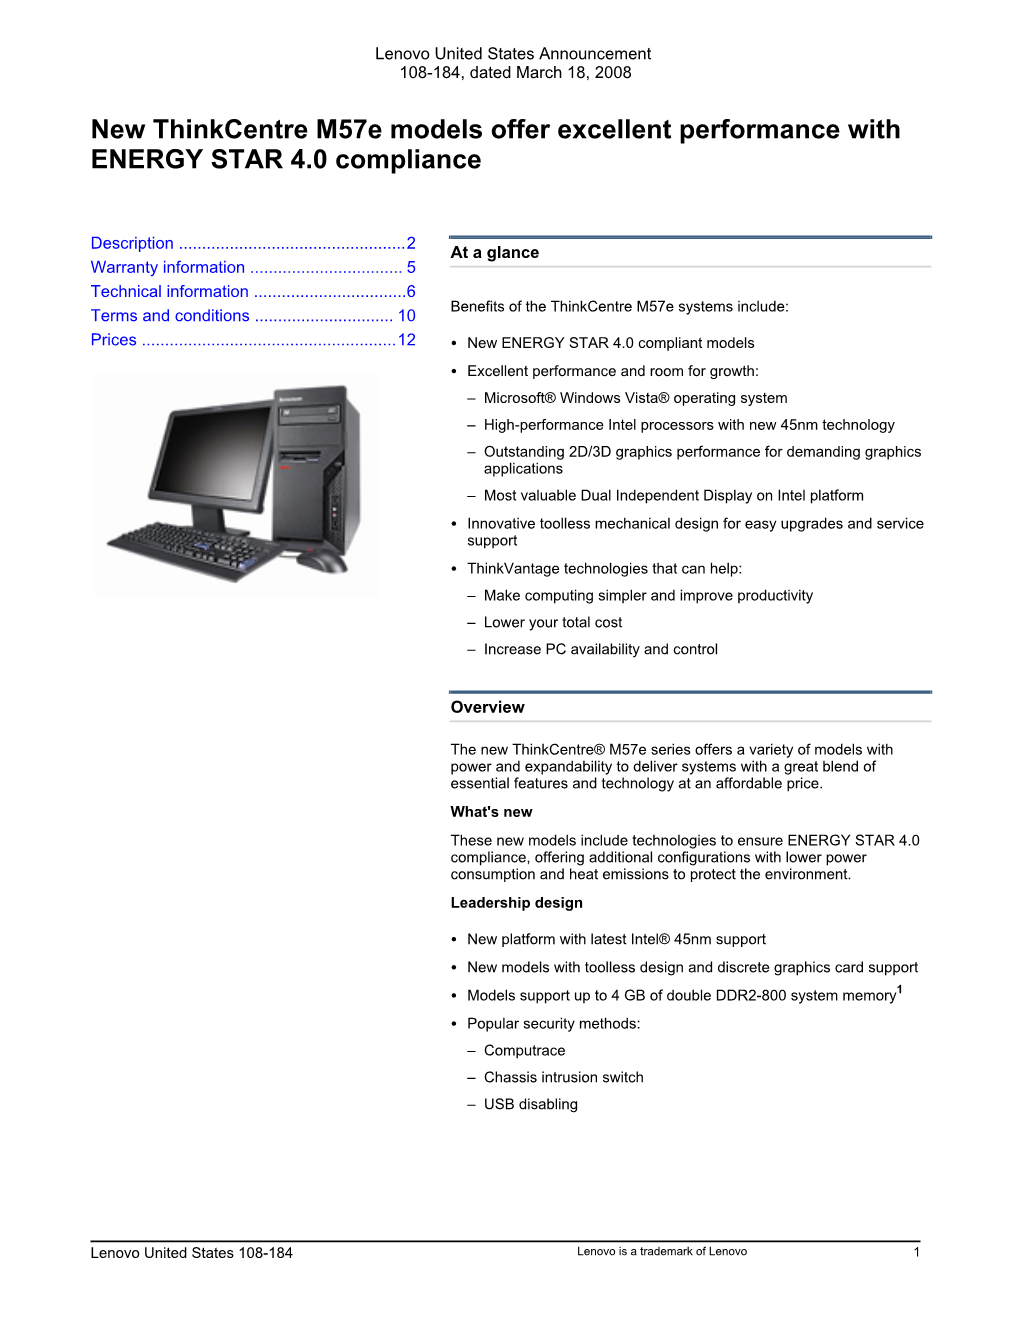 New Thinkcentre M57e Models Offer Excellent Performance with ENERGY STAR 4.0 Compliance